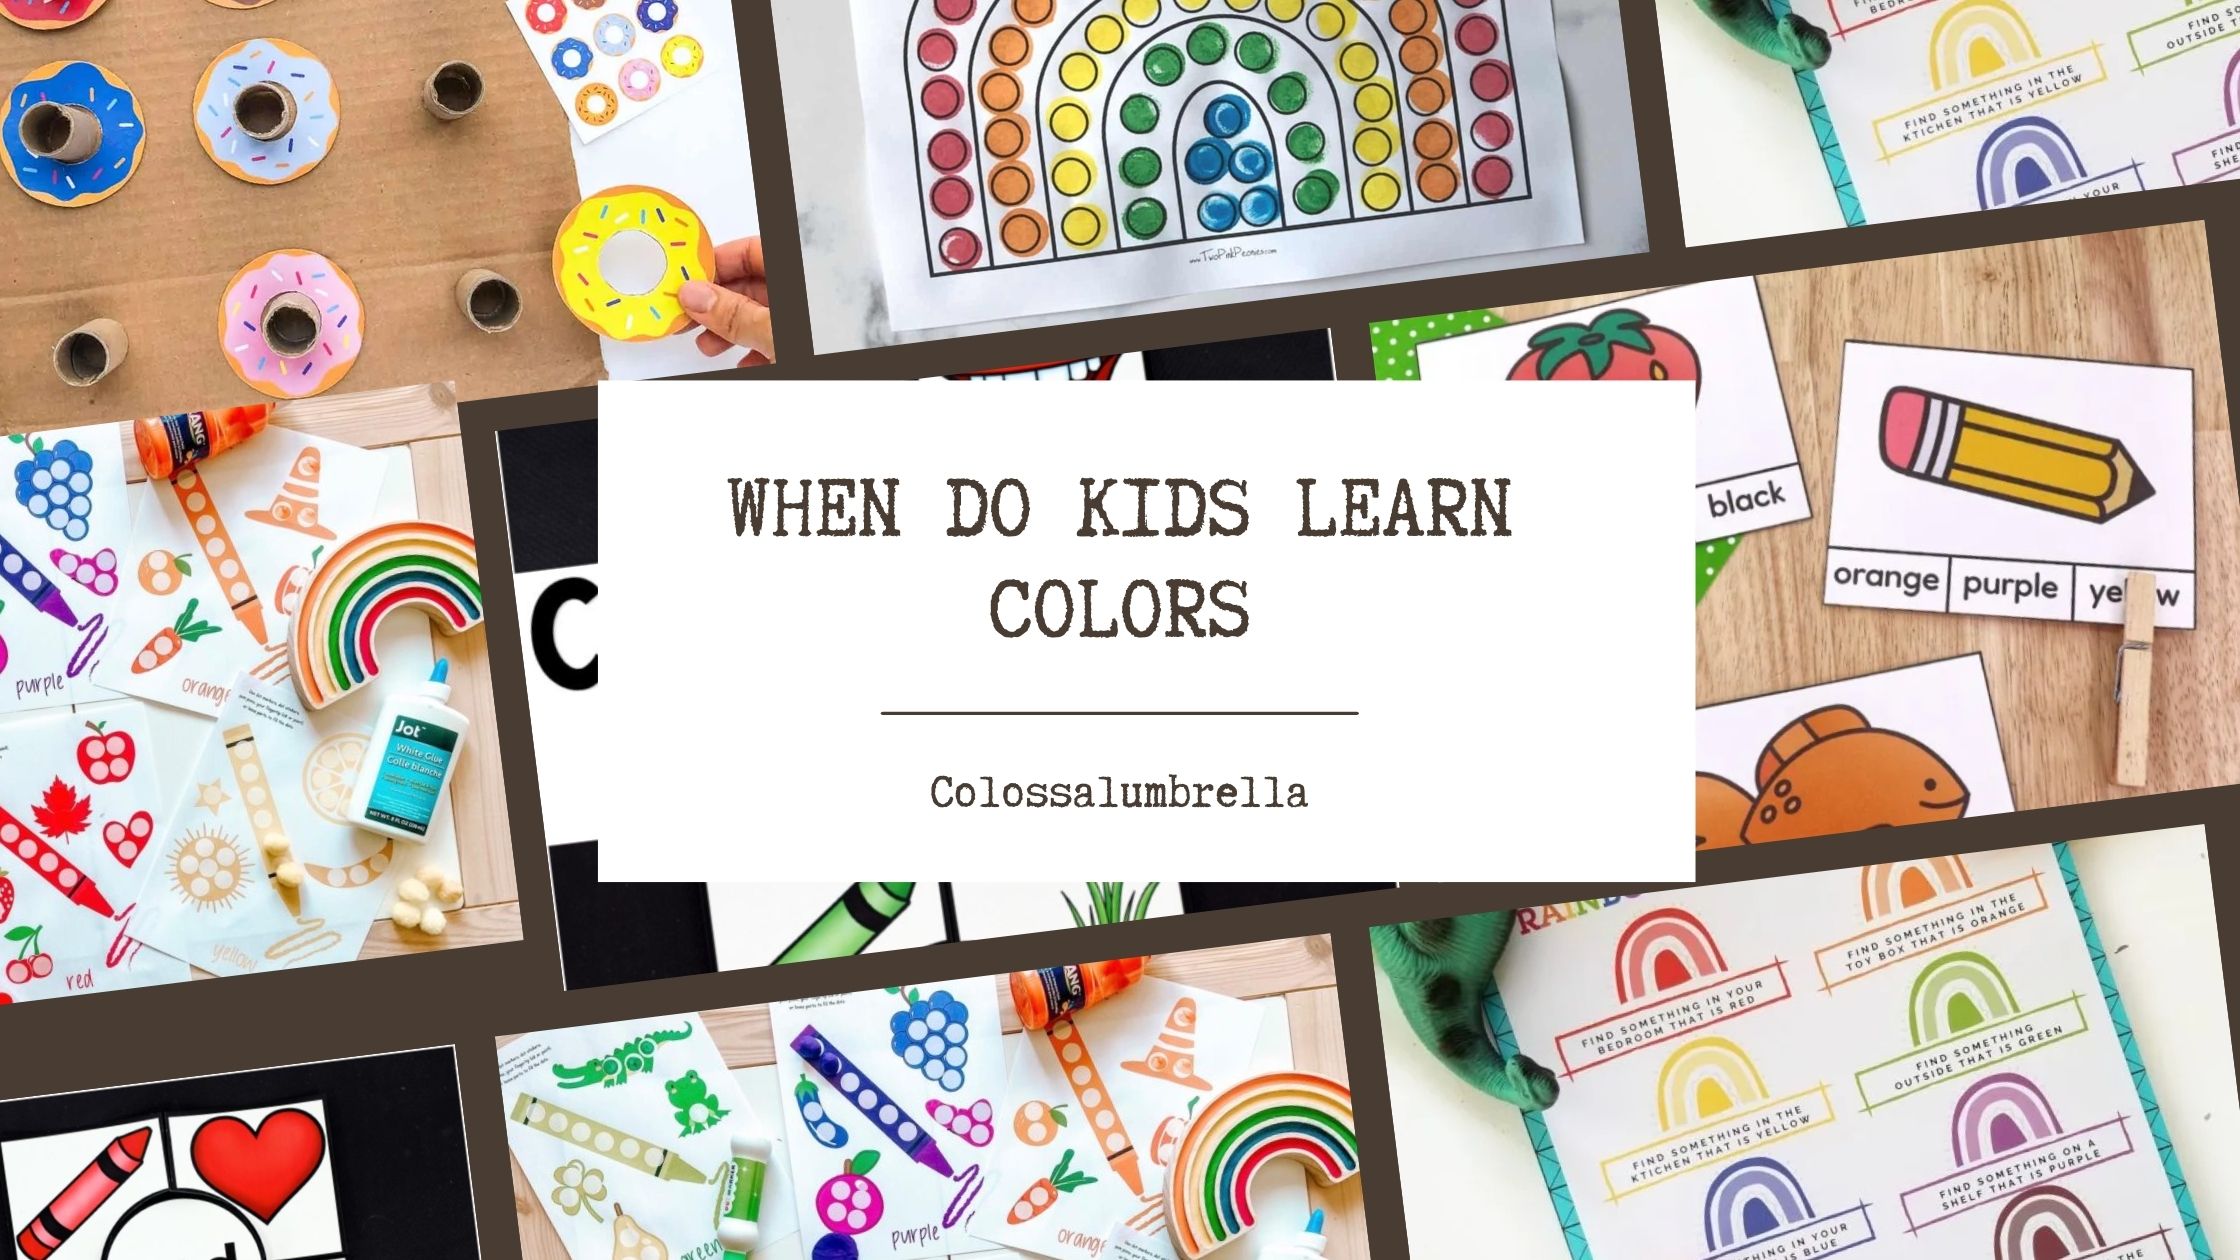 When do kids learn colors